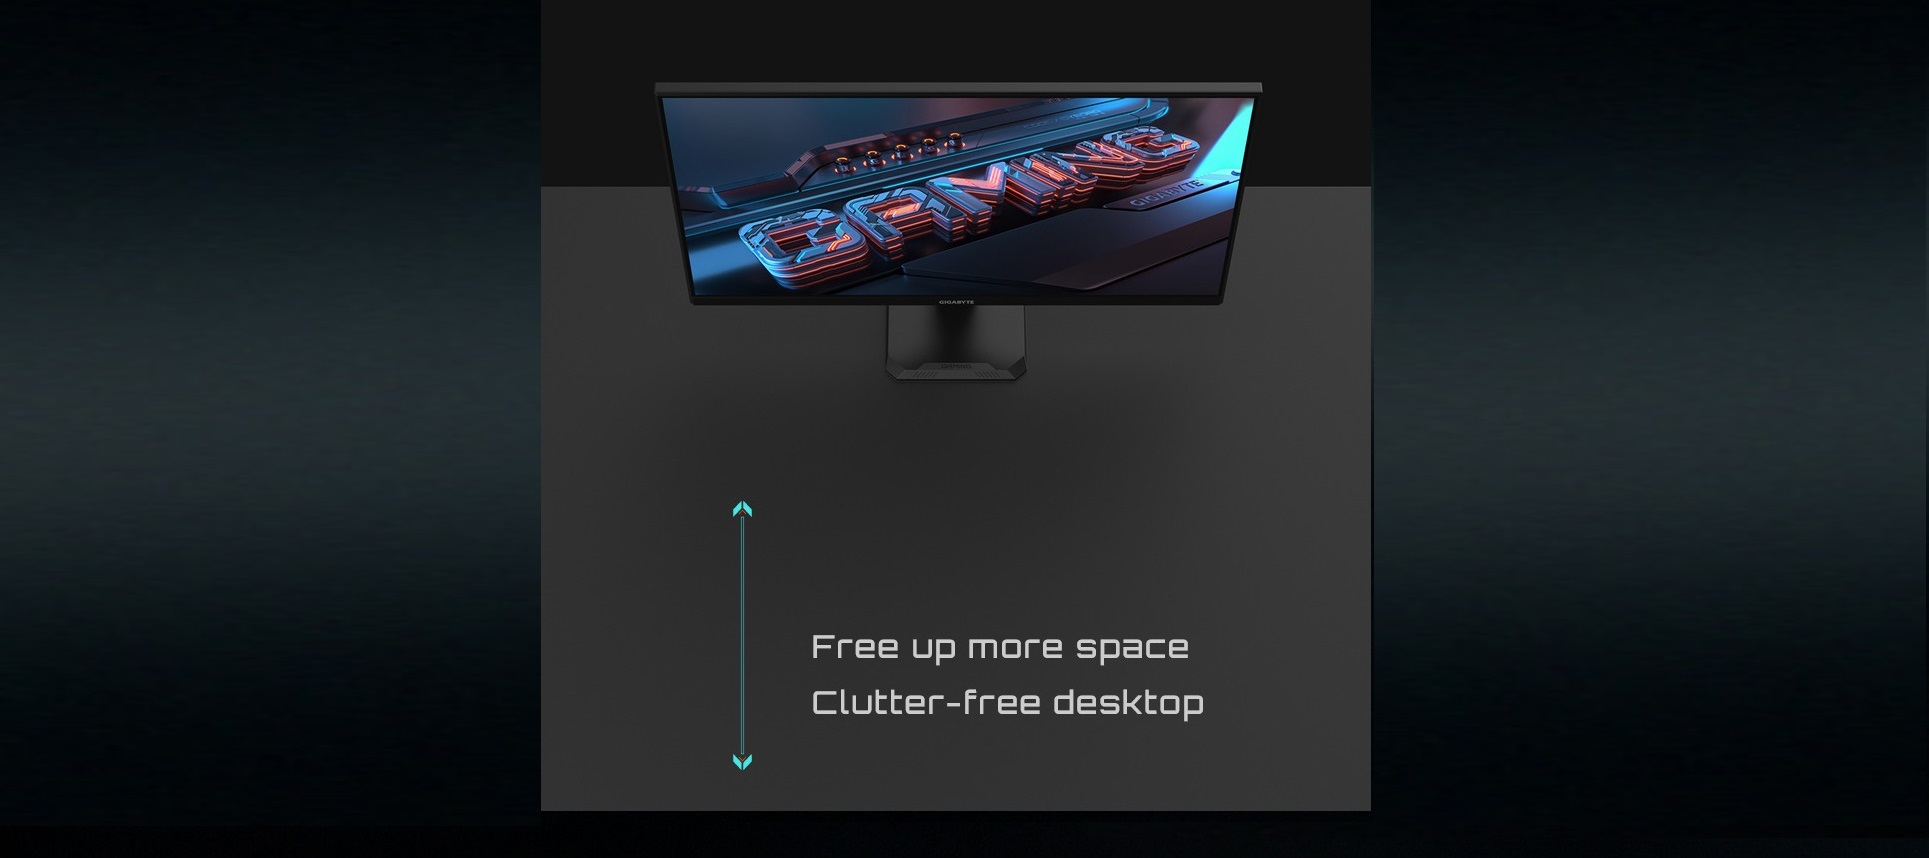 A large marketing image providing additional information about the product Gigabyte GS27QA 27" QHD 180Hz IPS Monitor - Additional alt info not provided